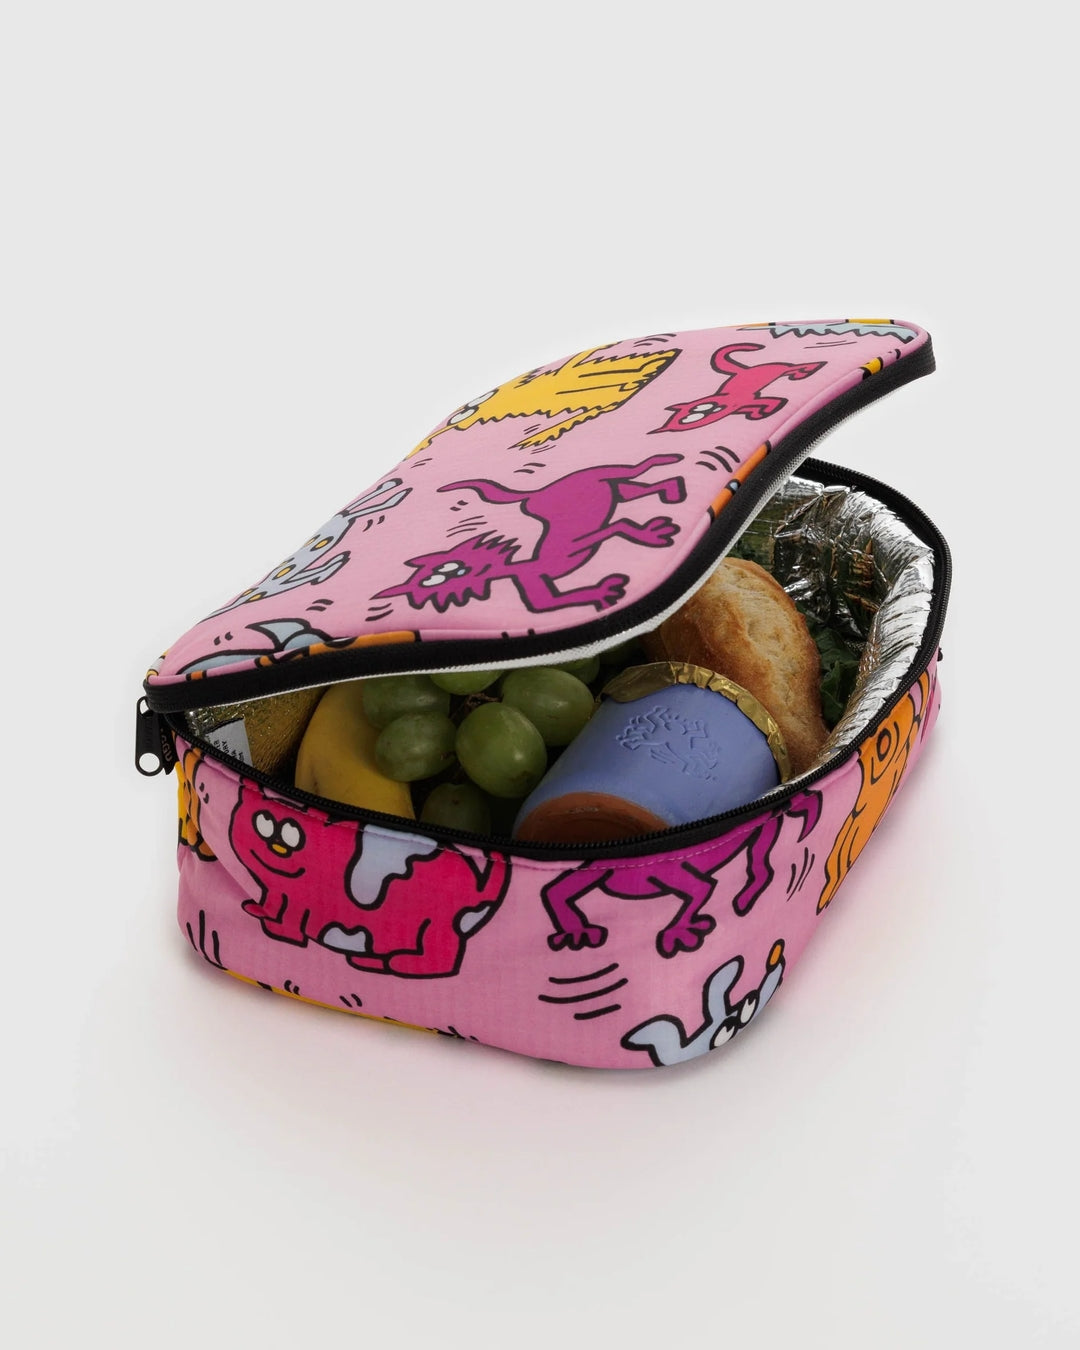 Lunch Box - Keith Haring [PRE ORDER]